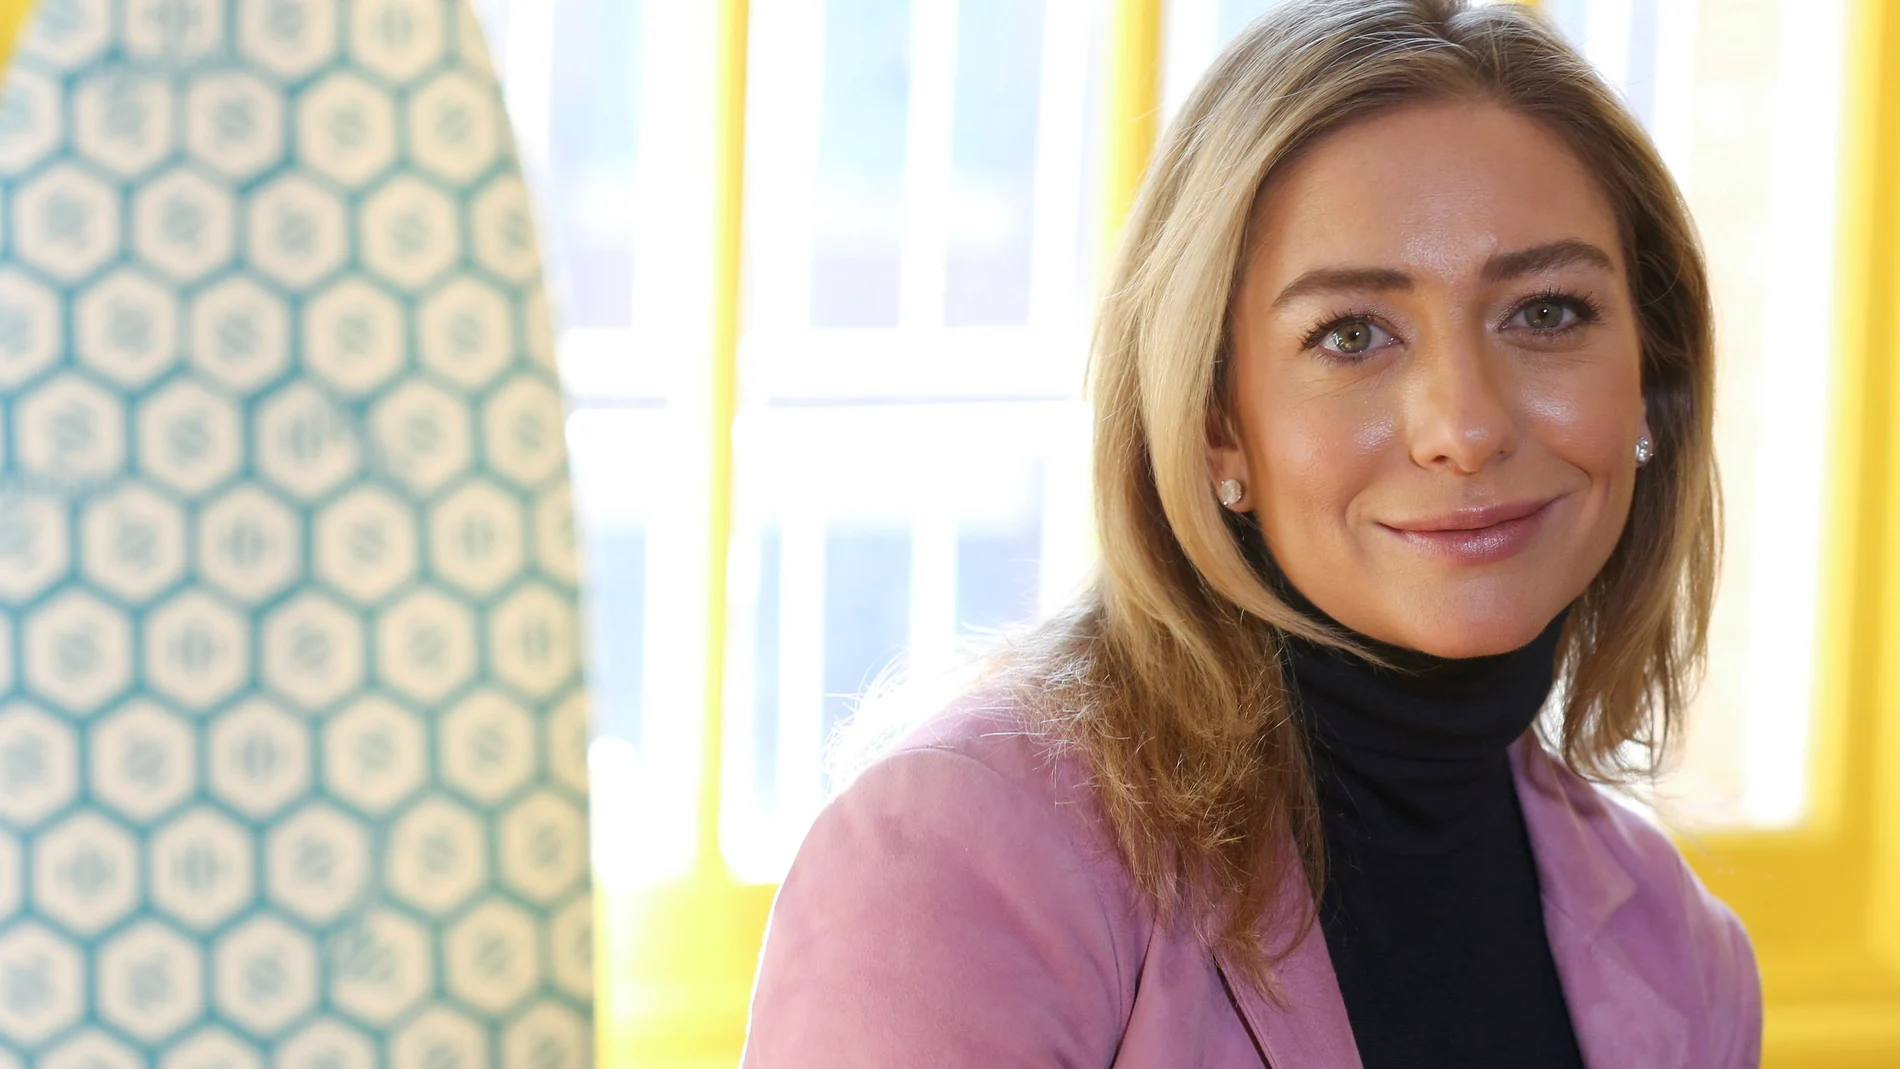 FILE PHOTO: Bumble founder and CEO Whitney Wolfe Herd sits for a portrait in the Manhattan borough of New York City, U.S., January 31, 2019. REUTERS/Caitlin Ochs/File Photo